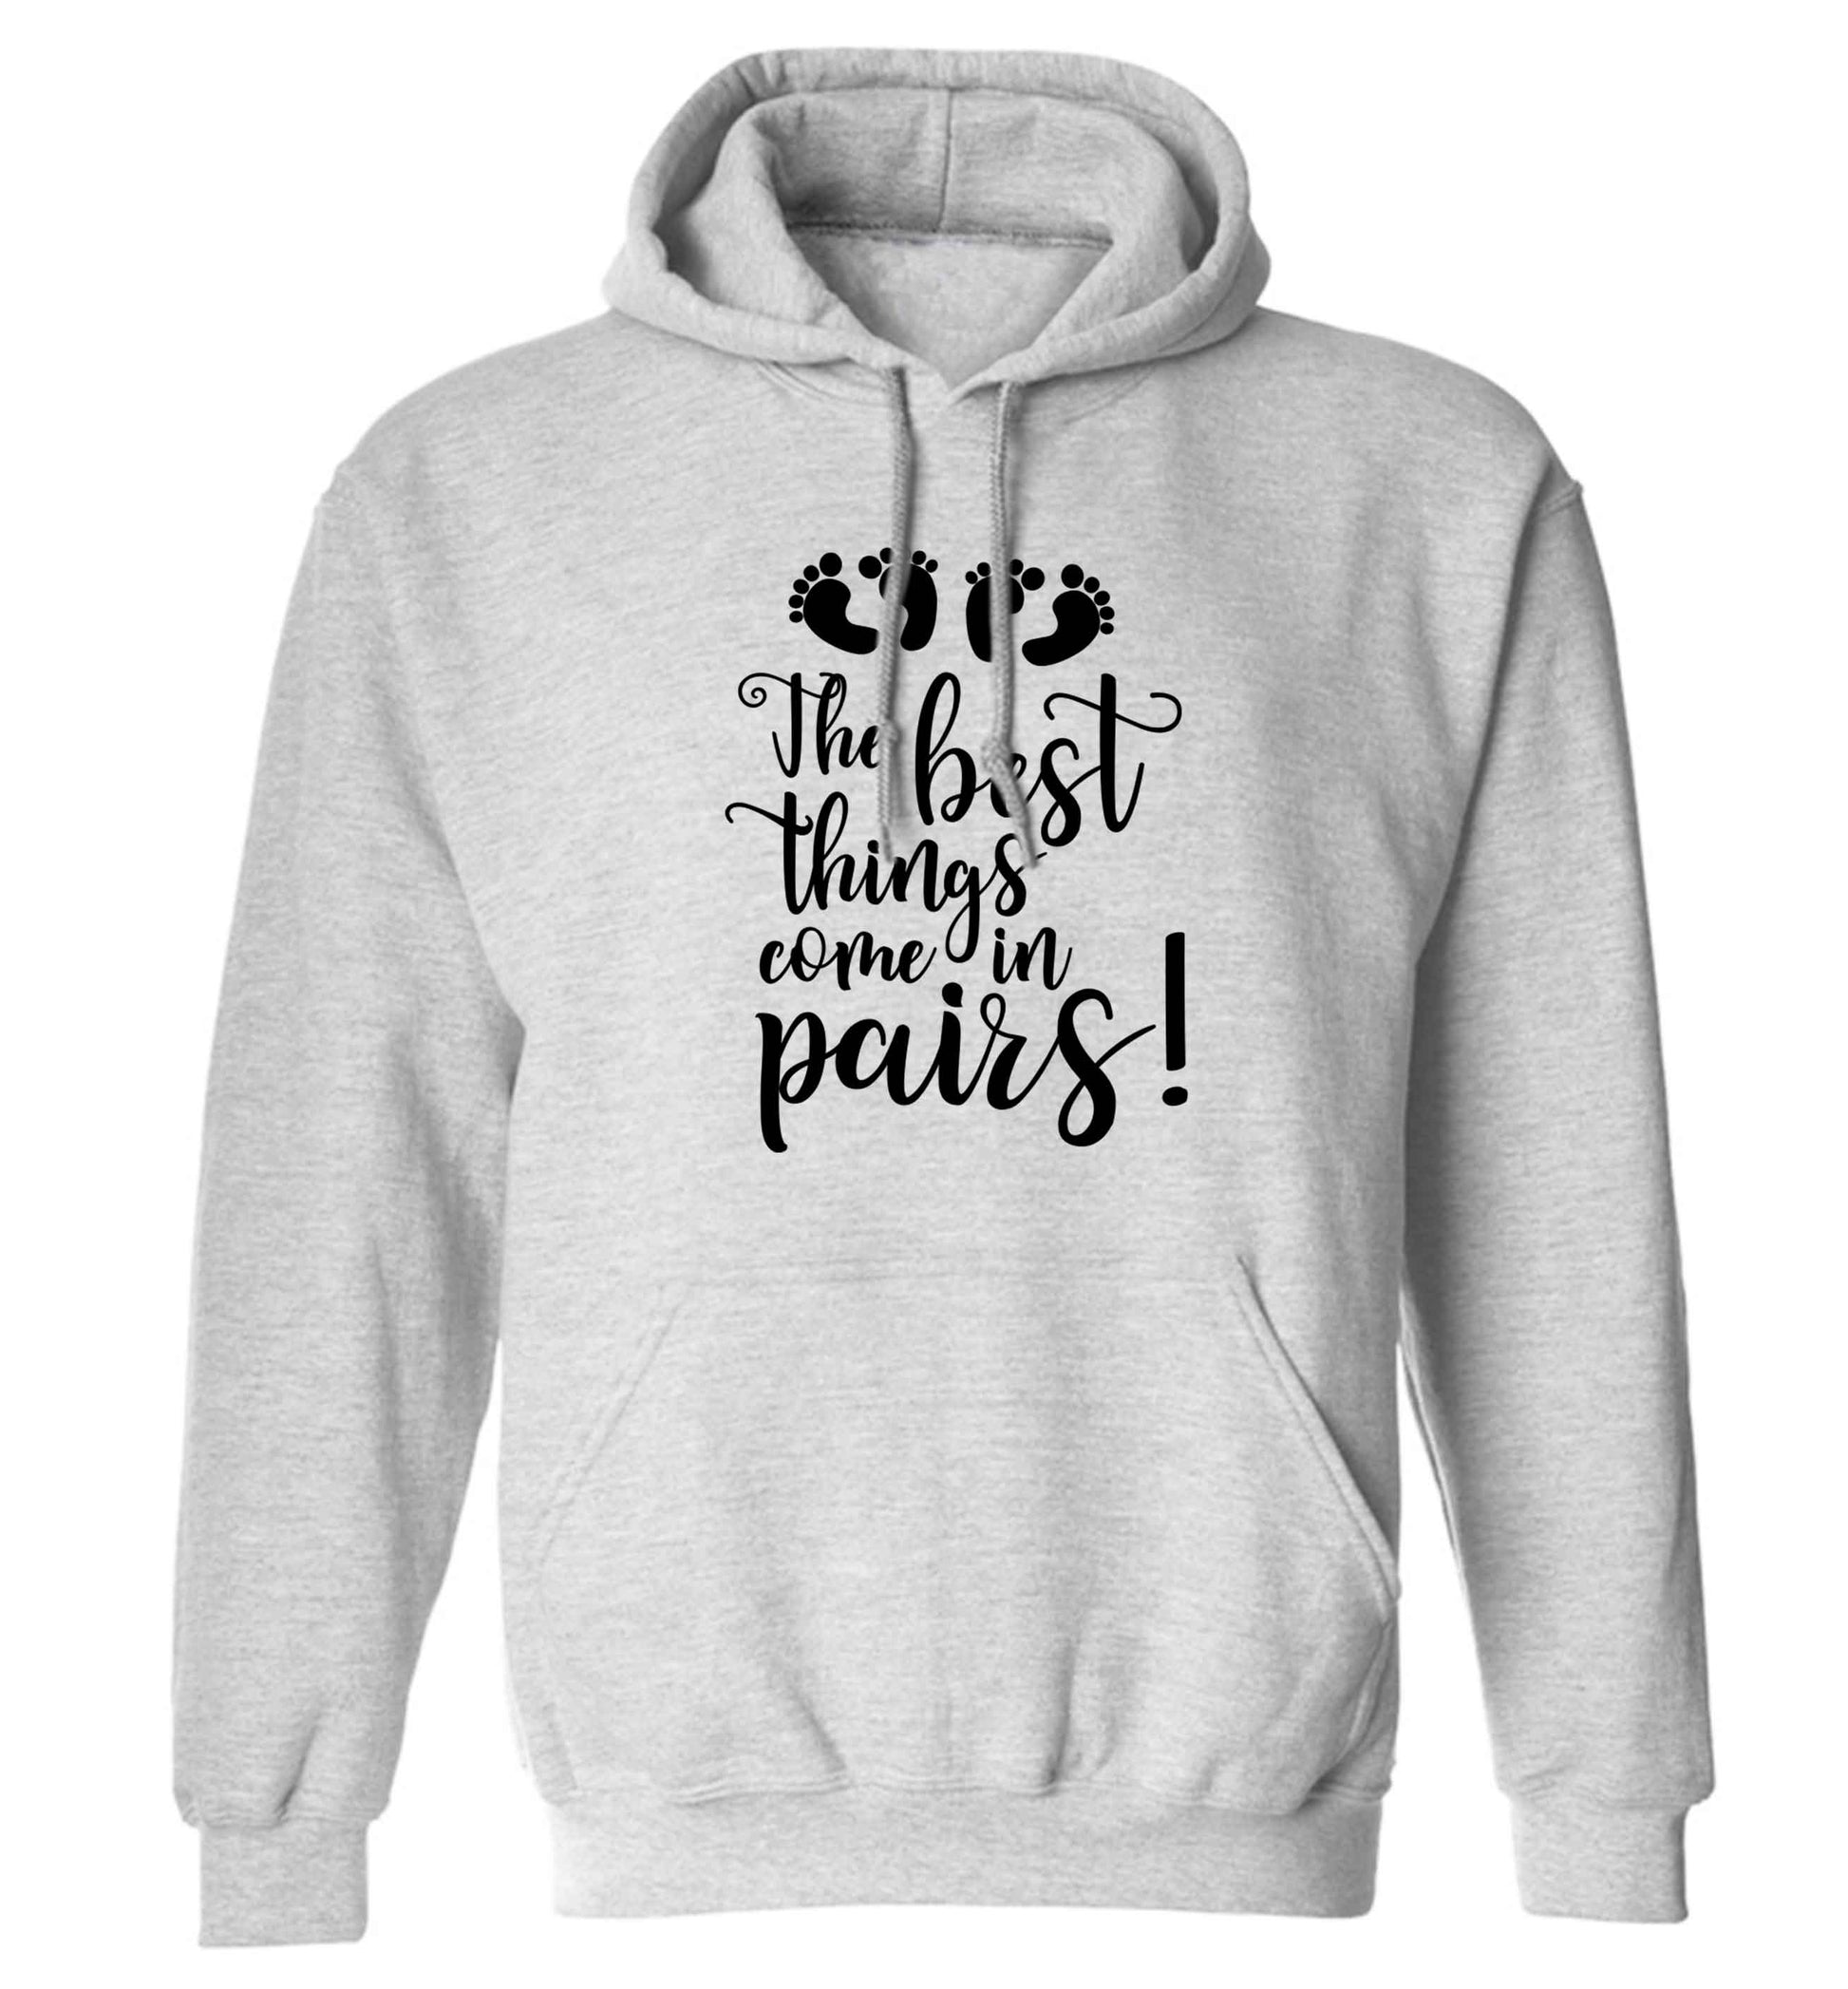 The best things come in pairs! adults unisex grey hoodie 2XL